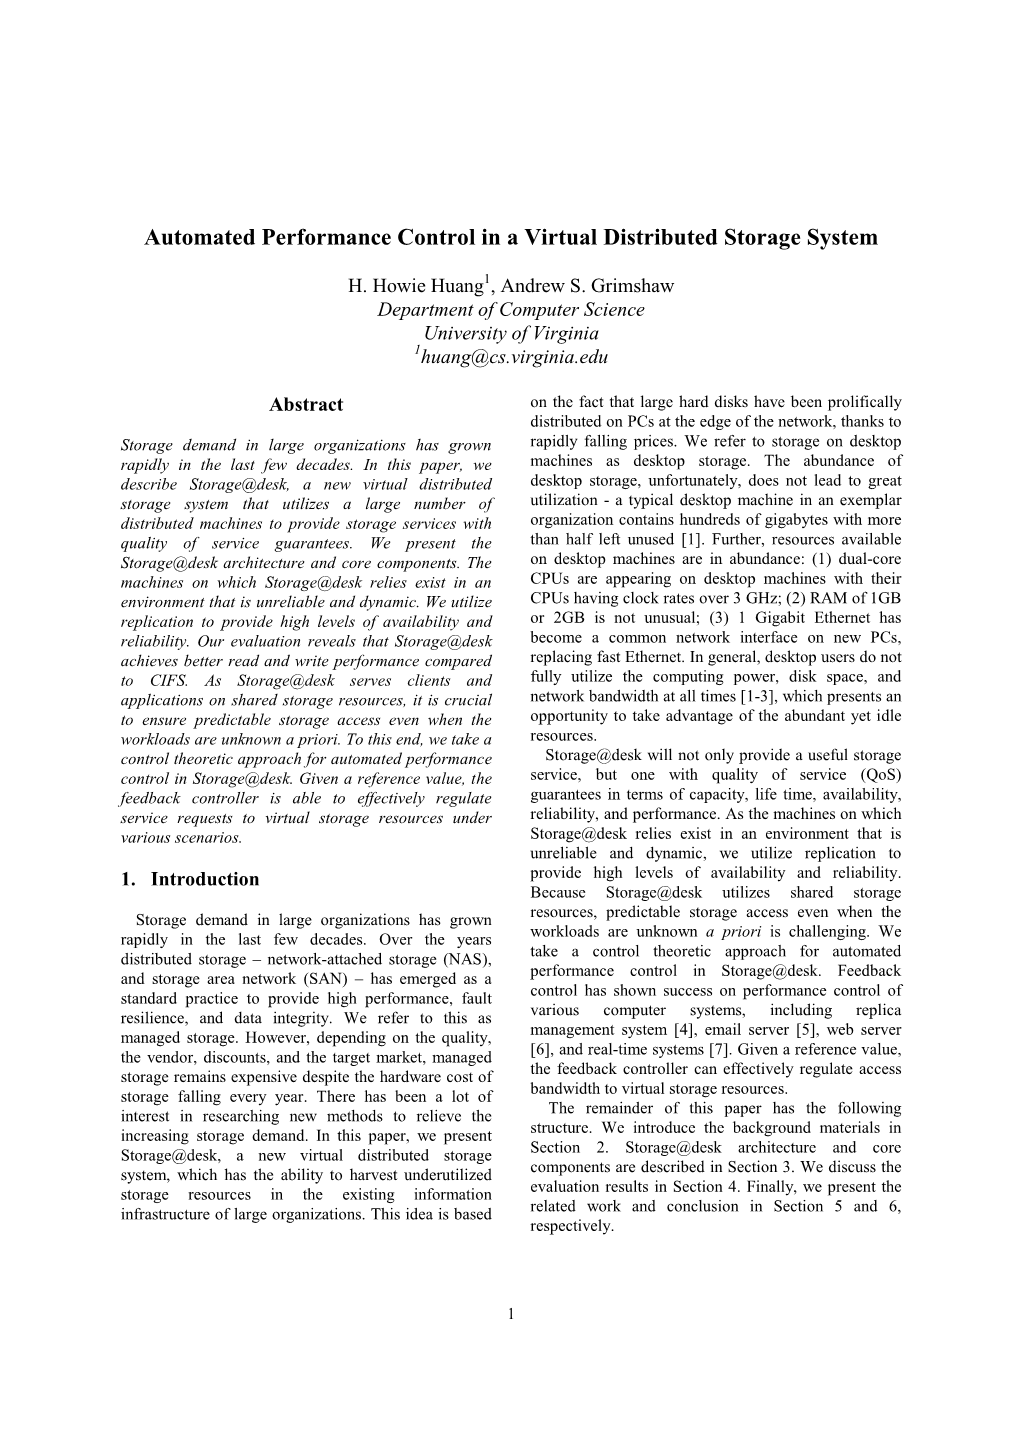 Automated Performance Control in a Virtual Distributed Storage System